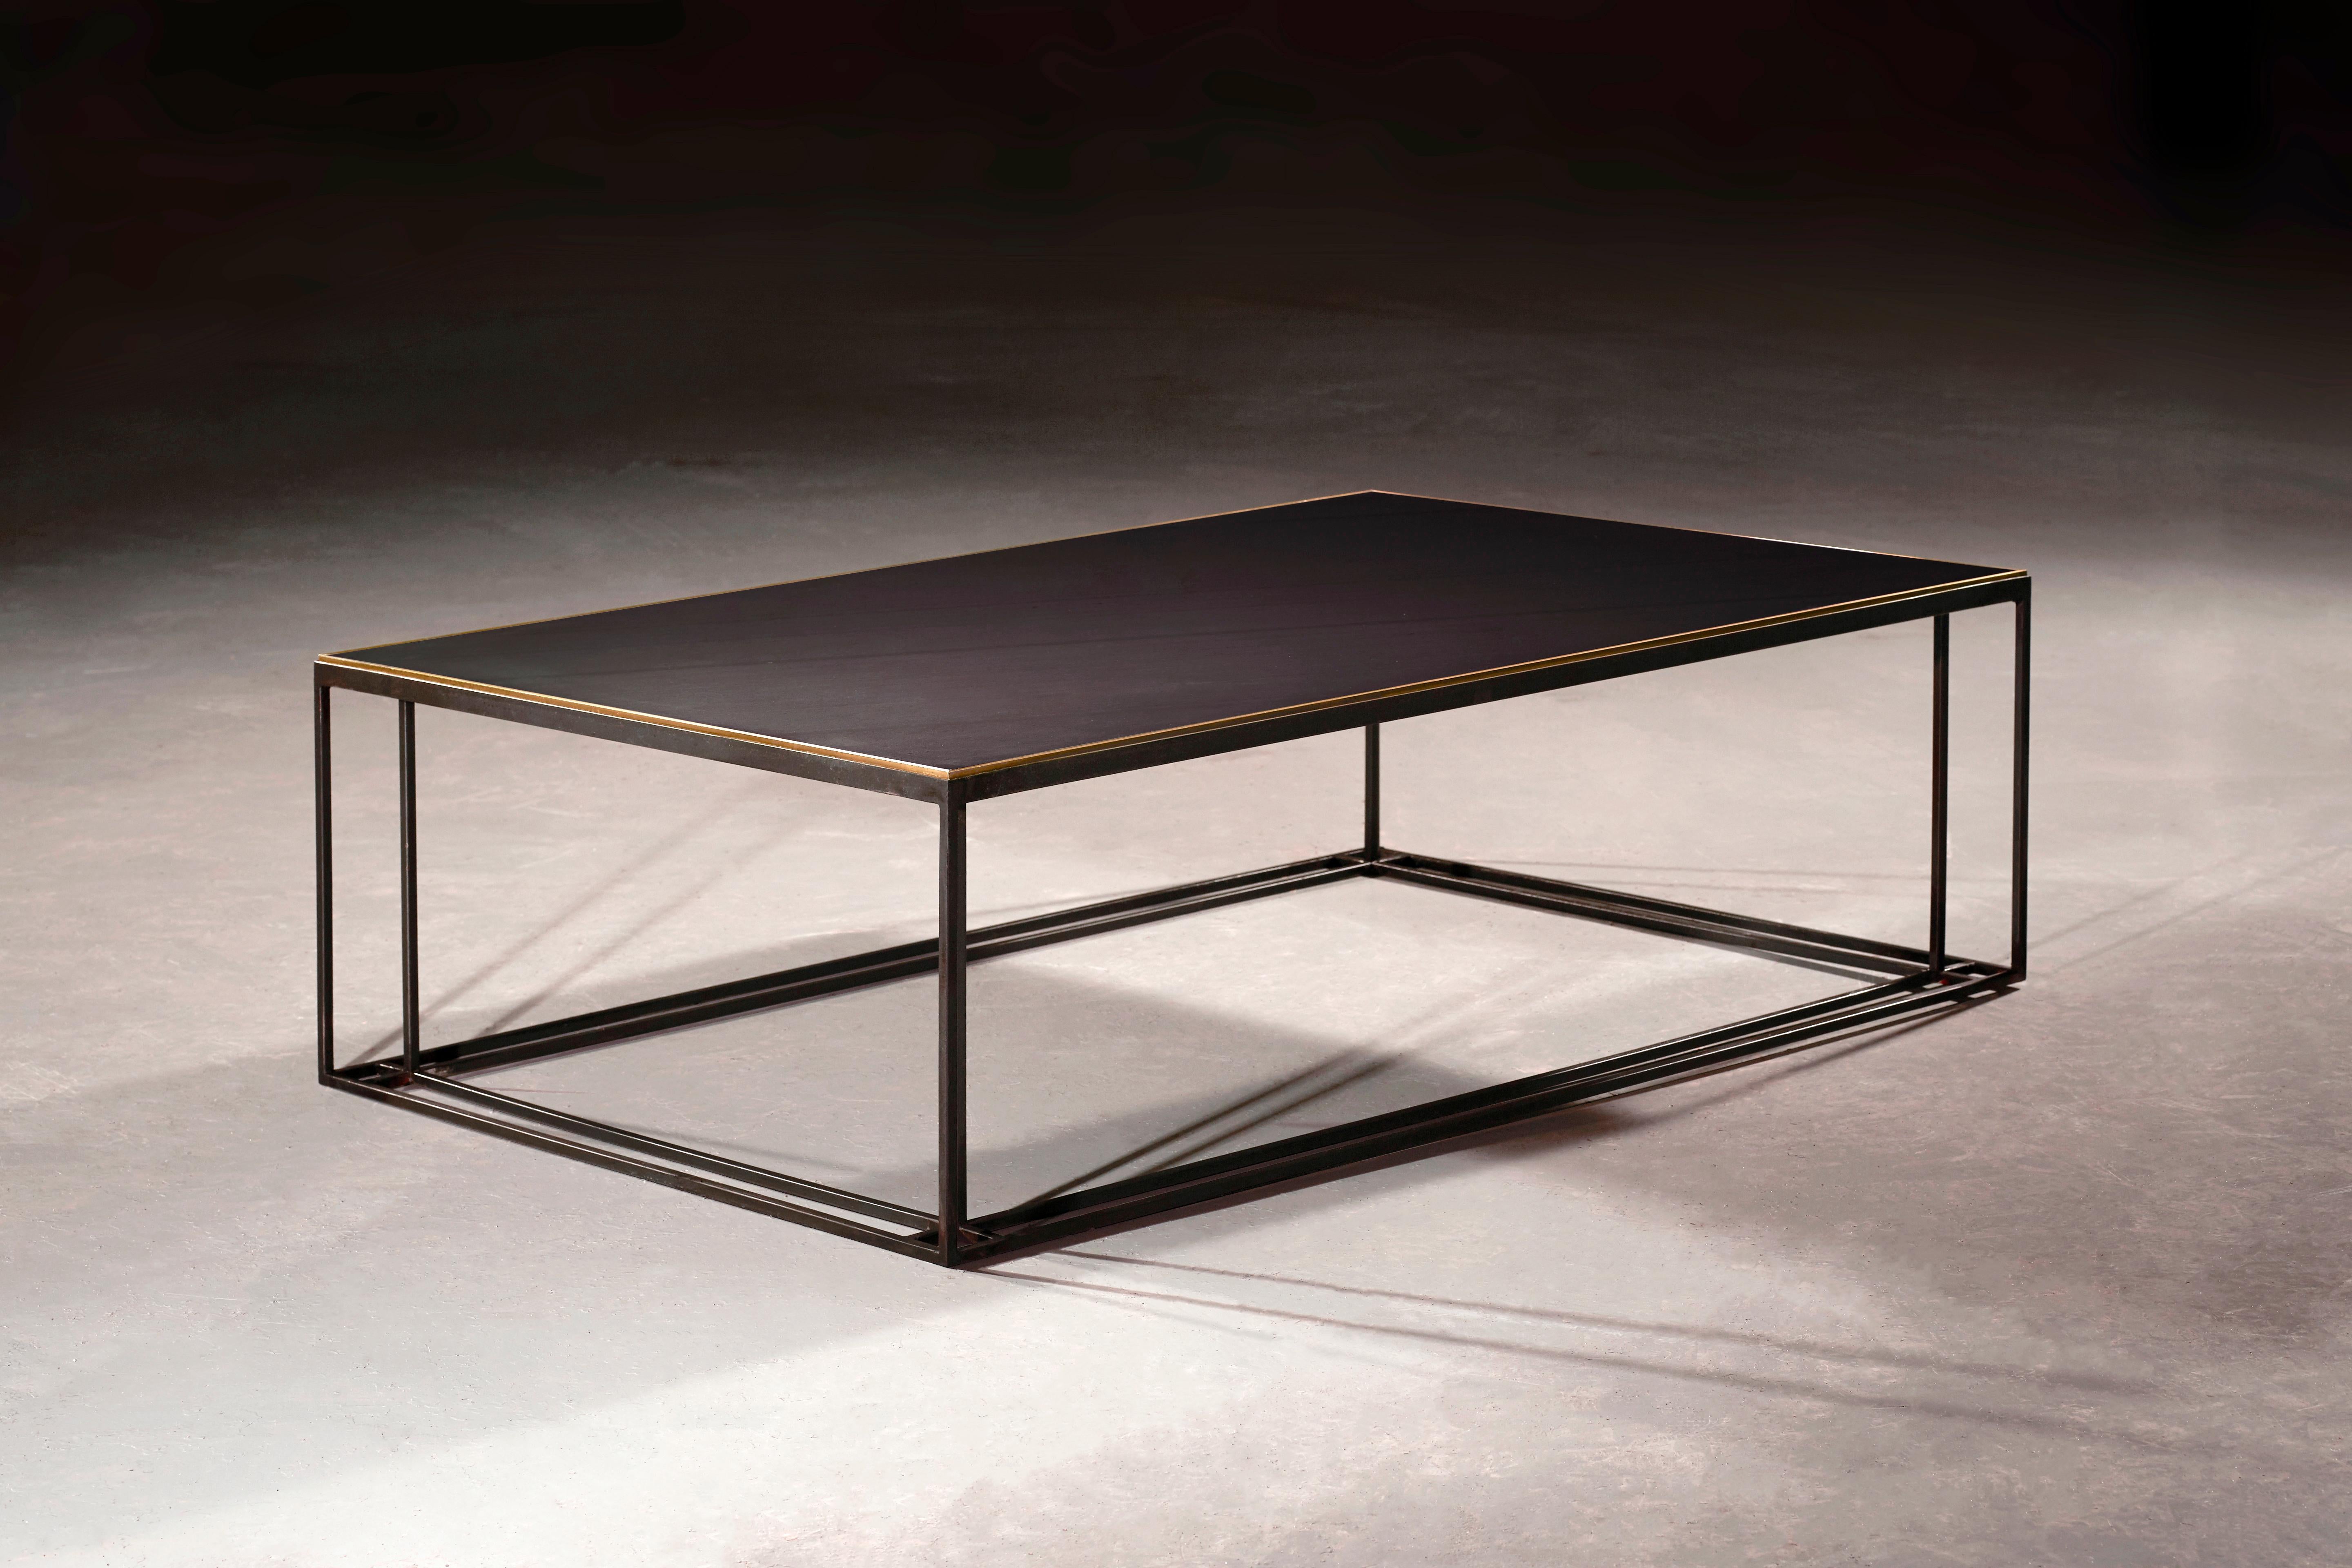 A coffee table in blackened steel and honed Cumbrian slate, with a polished brass trim. Hand crafted to order in the North. Bespoke finishes and sizes are available.

Measures: 90cm width x 60cm depth x 35cm height.
Custom finishes and sizes